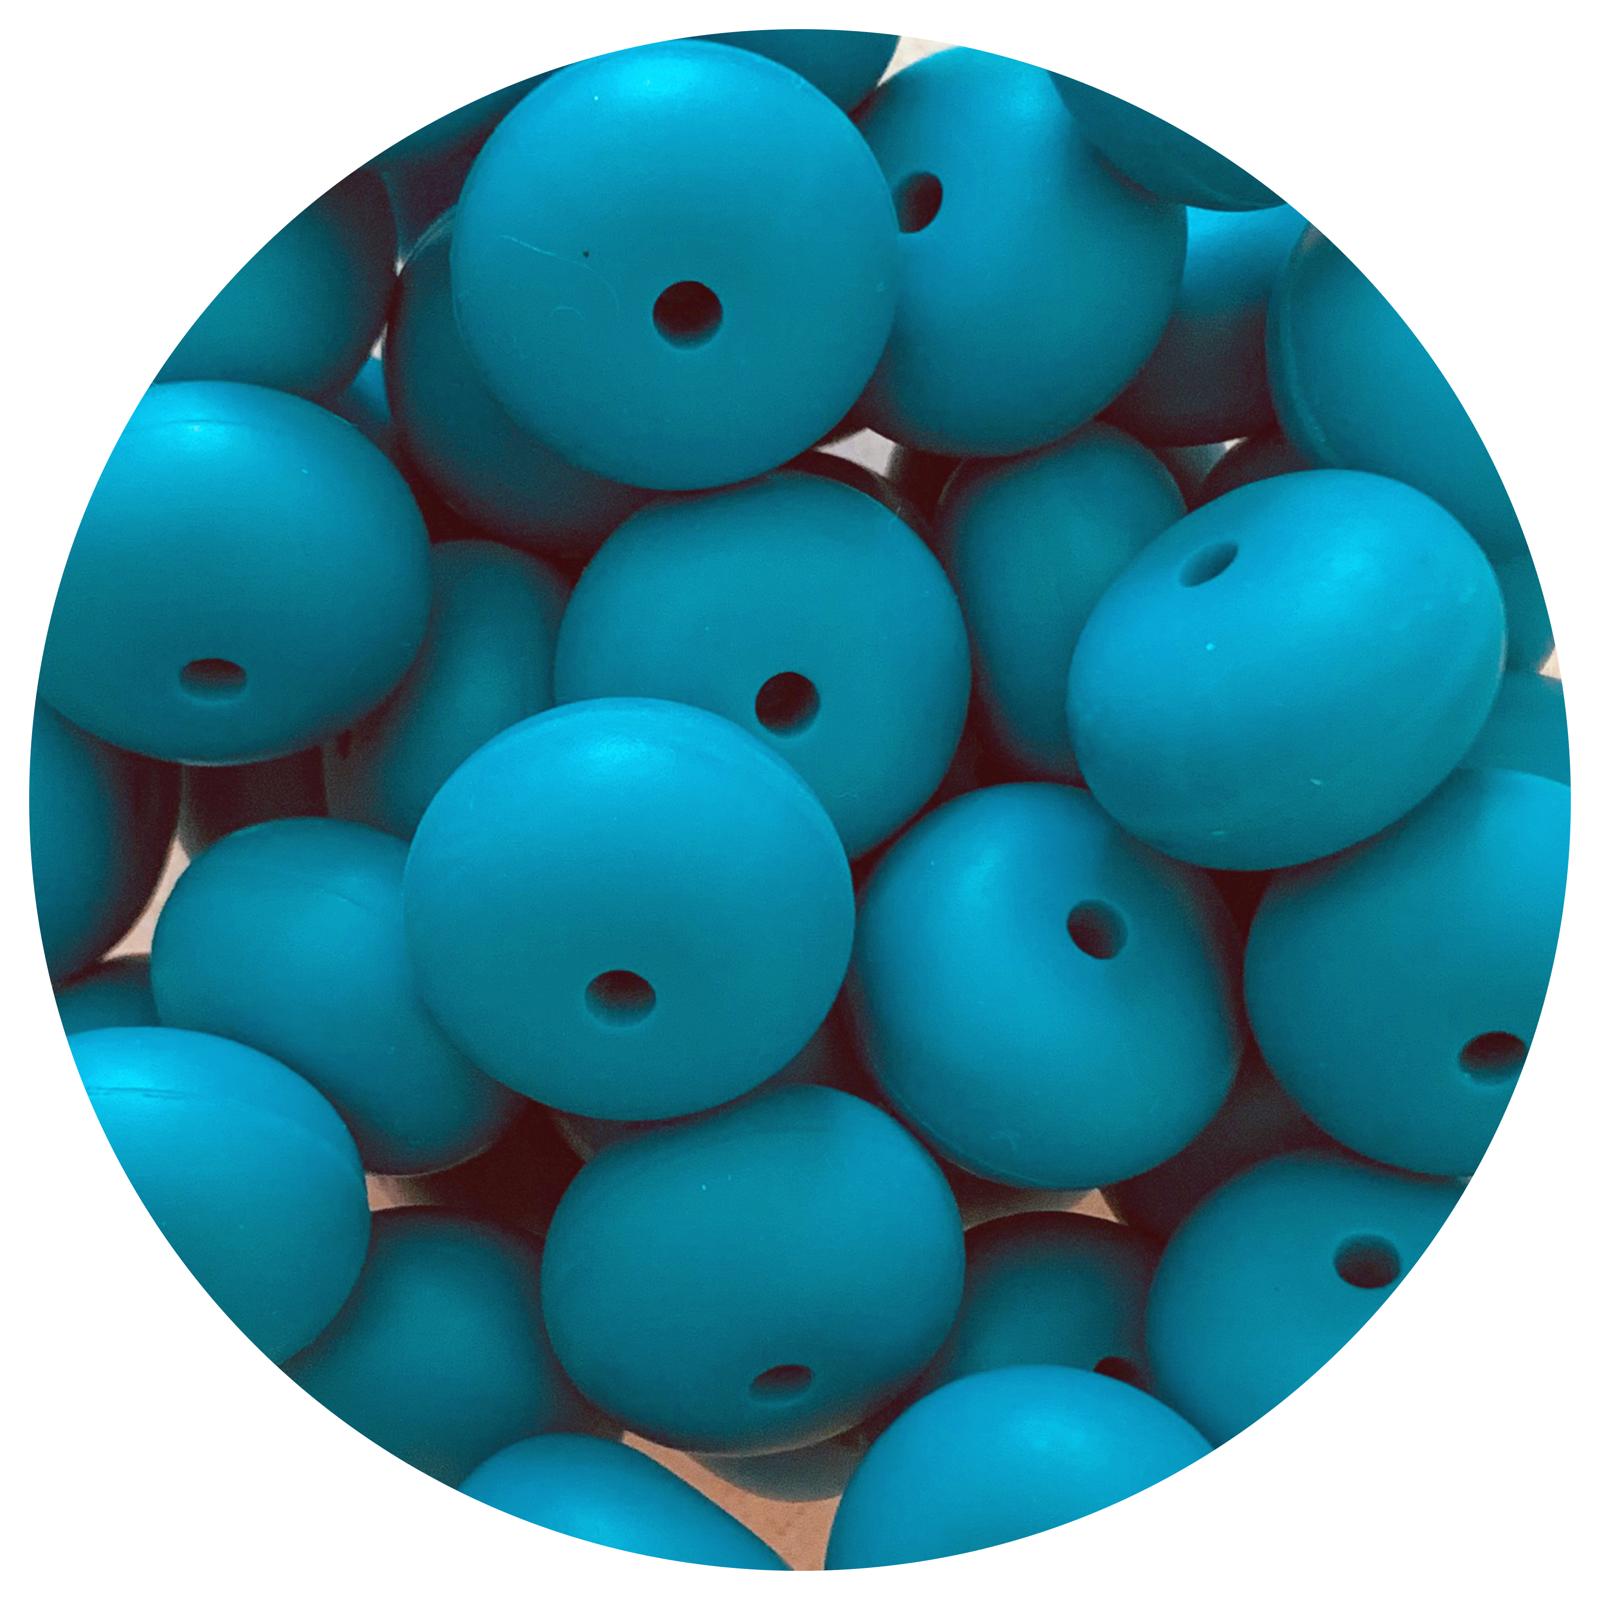 Teal - 22mm Abacus Silicone Beads - 5 Beads